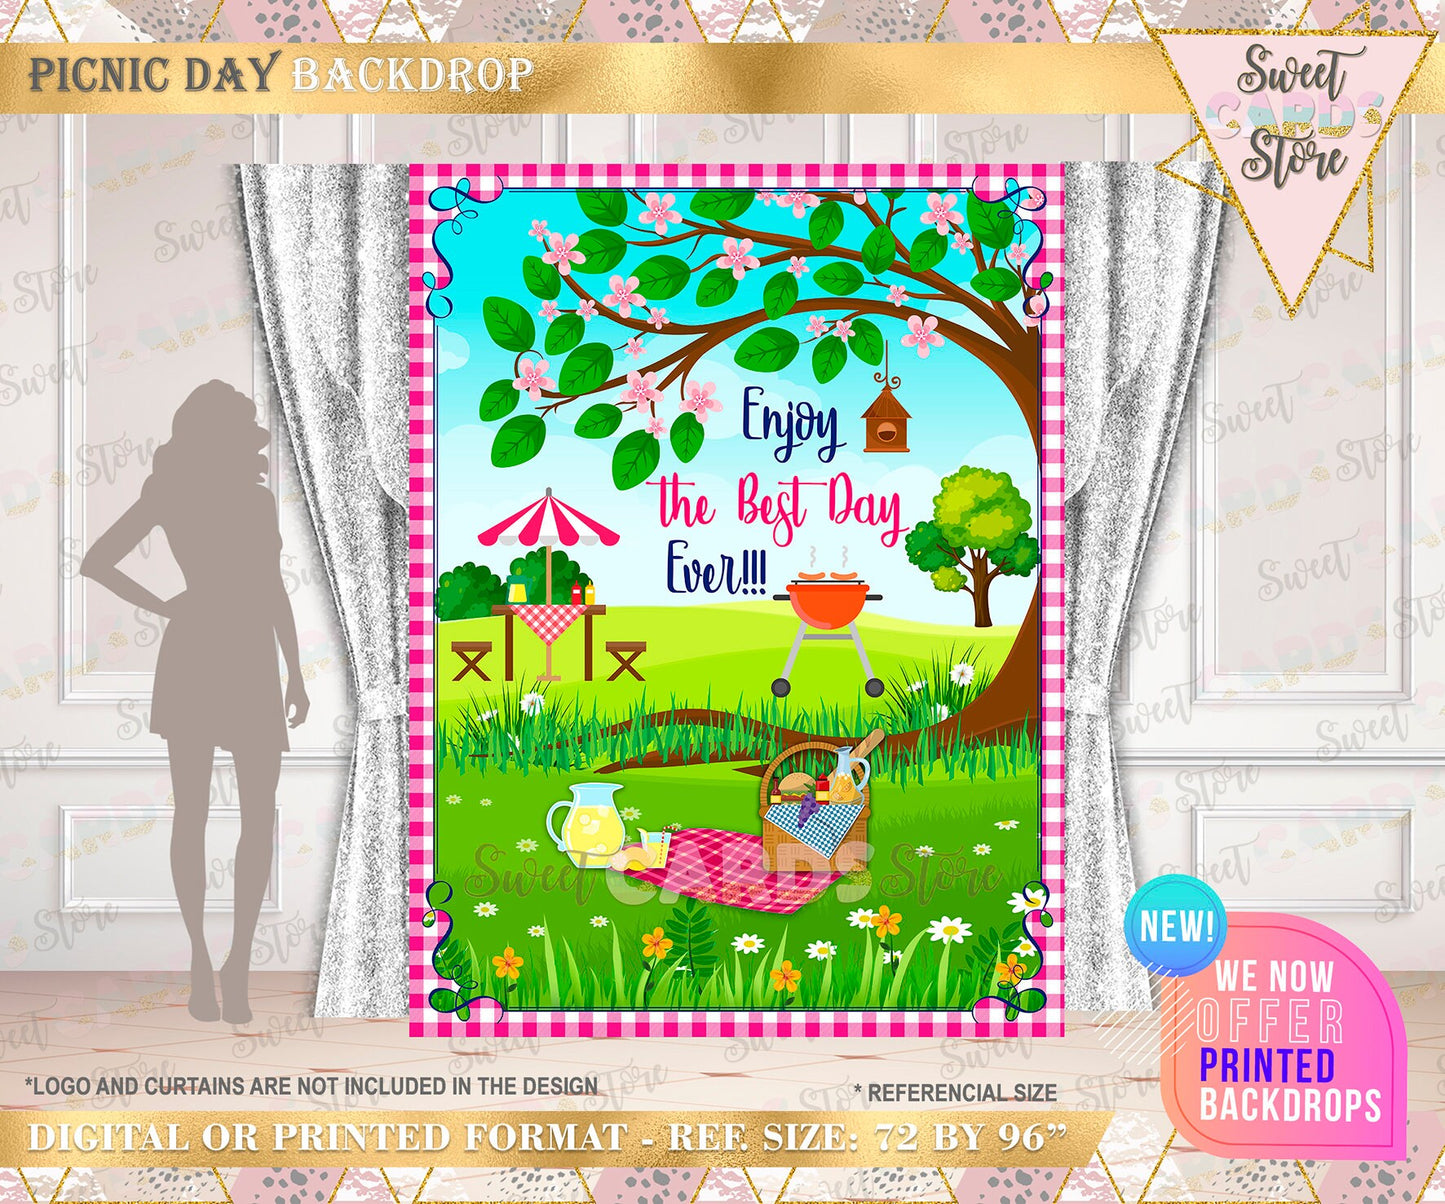 Picnic Backdrop, Picnic Day Backdrop, Picnic Birthday Party decor, picnic background, Picnic Banner